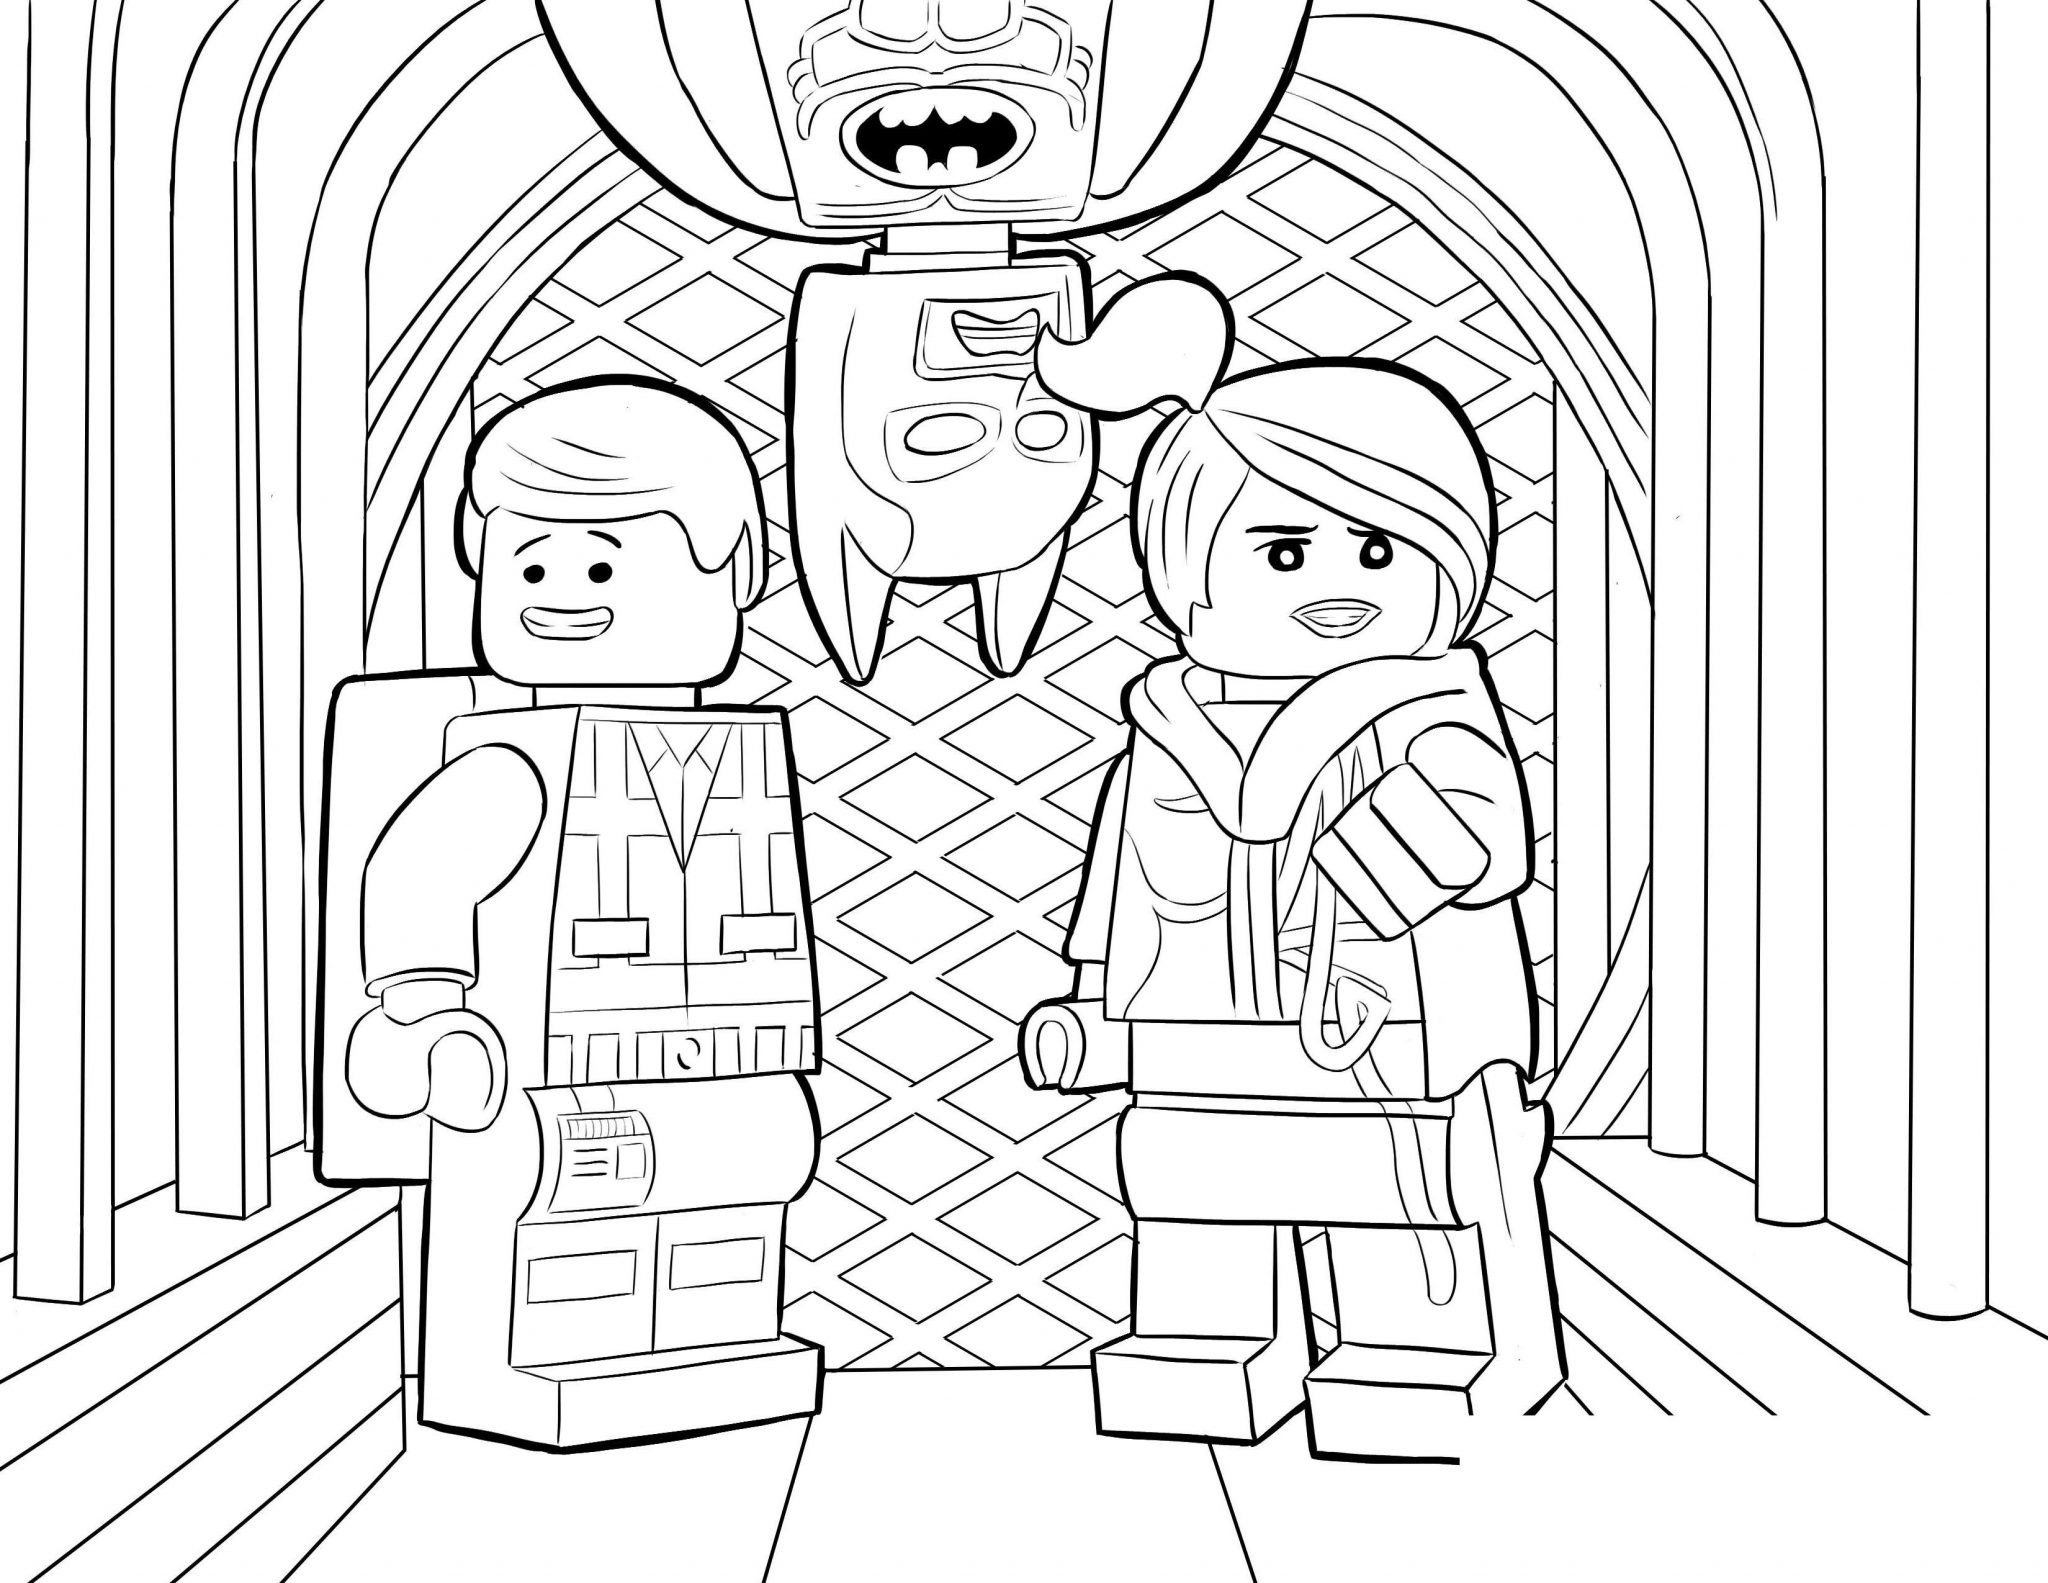 Top 30 Coloring Pages for Boys Lego Ninjago – Home, Family, Style and ...